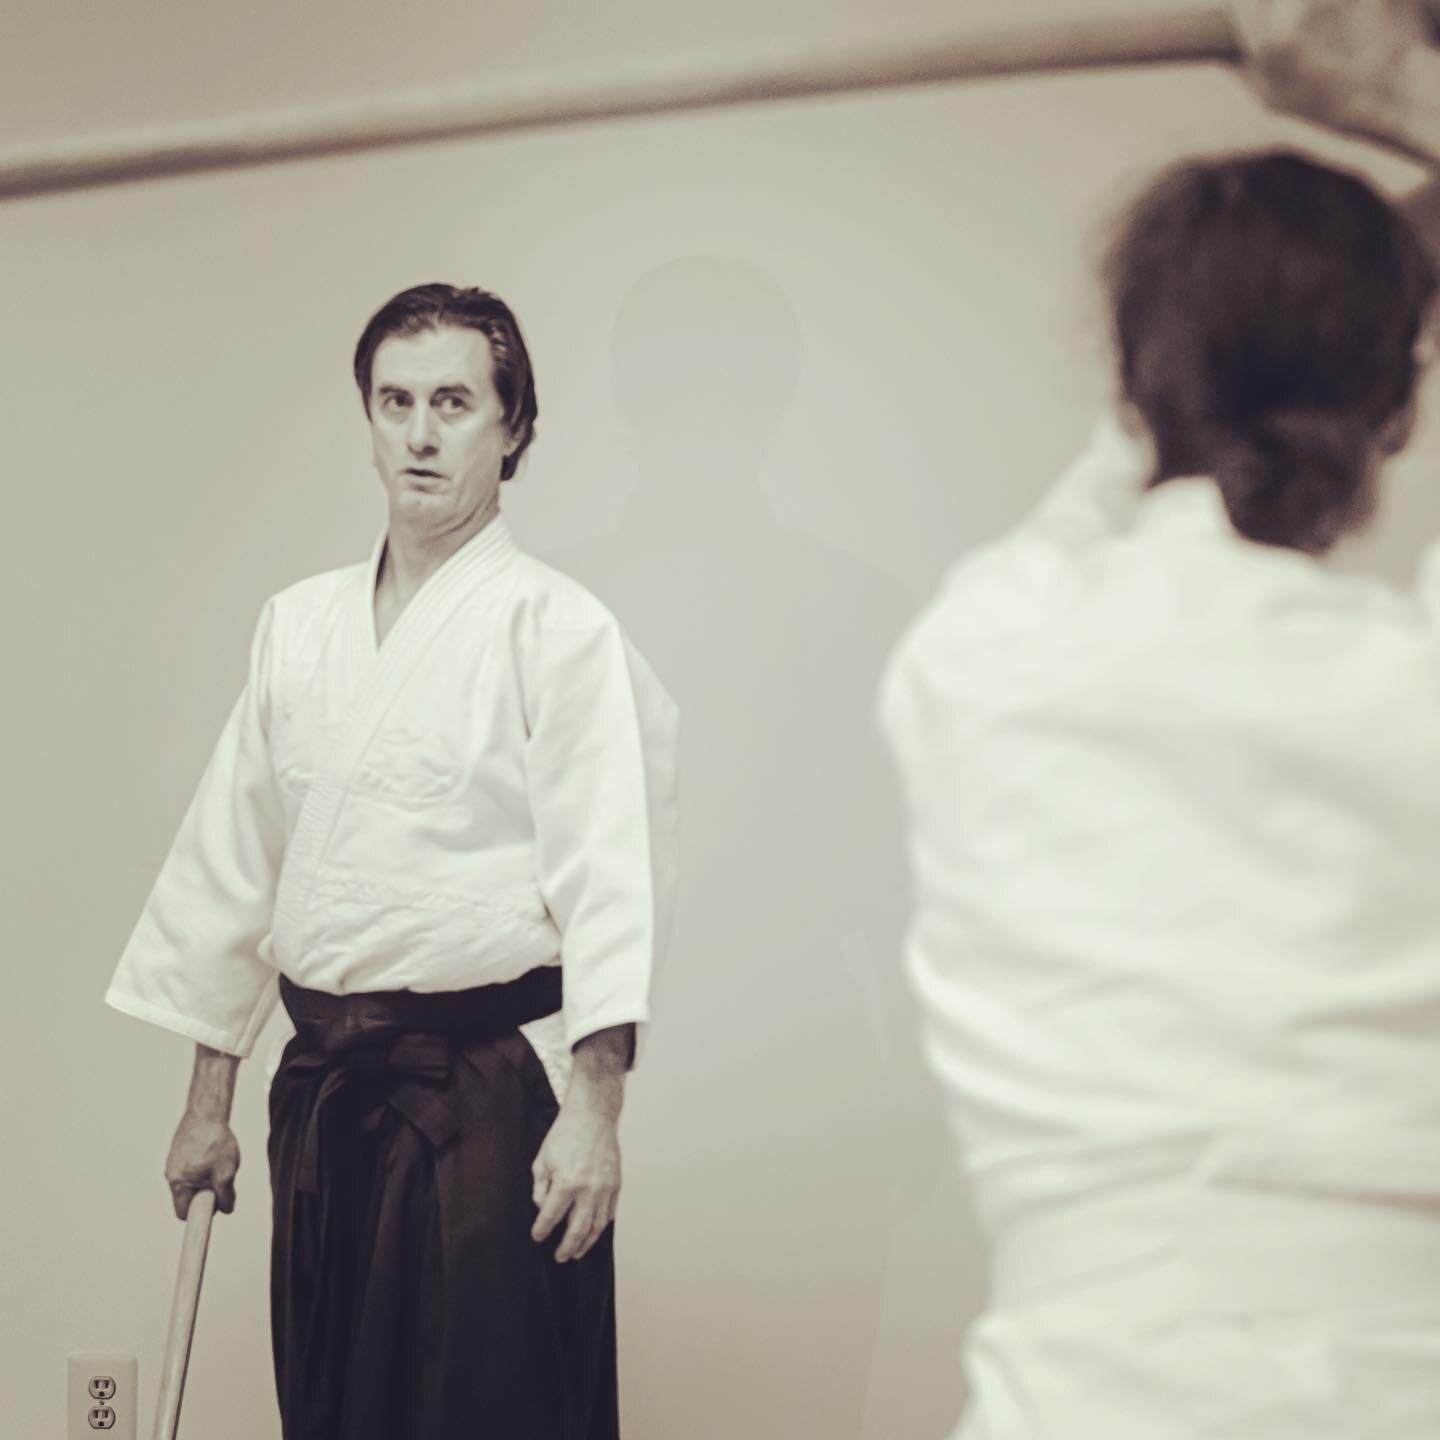 Getting back to it. Scenes from Sensei Tom Boggs class #aikido #training #exercise #workout #bokken #keepworking #fitness #martialarts #bushido #loudouncounty